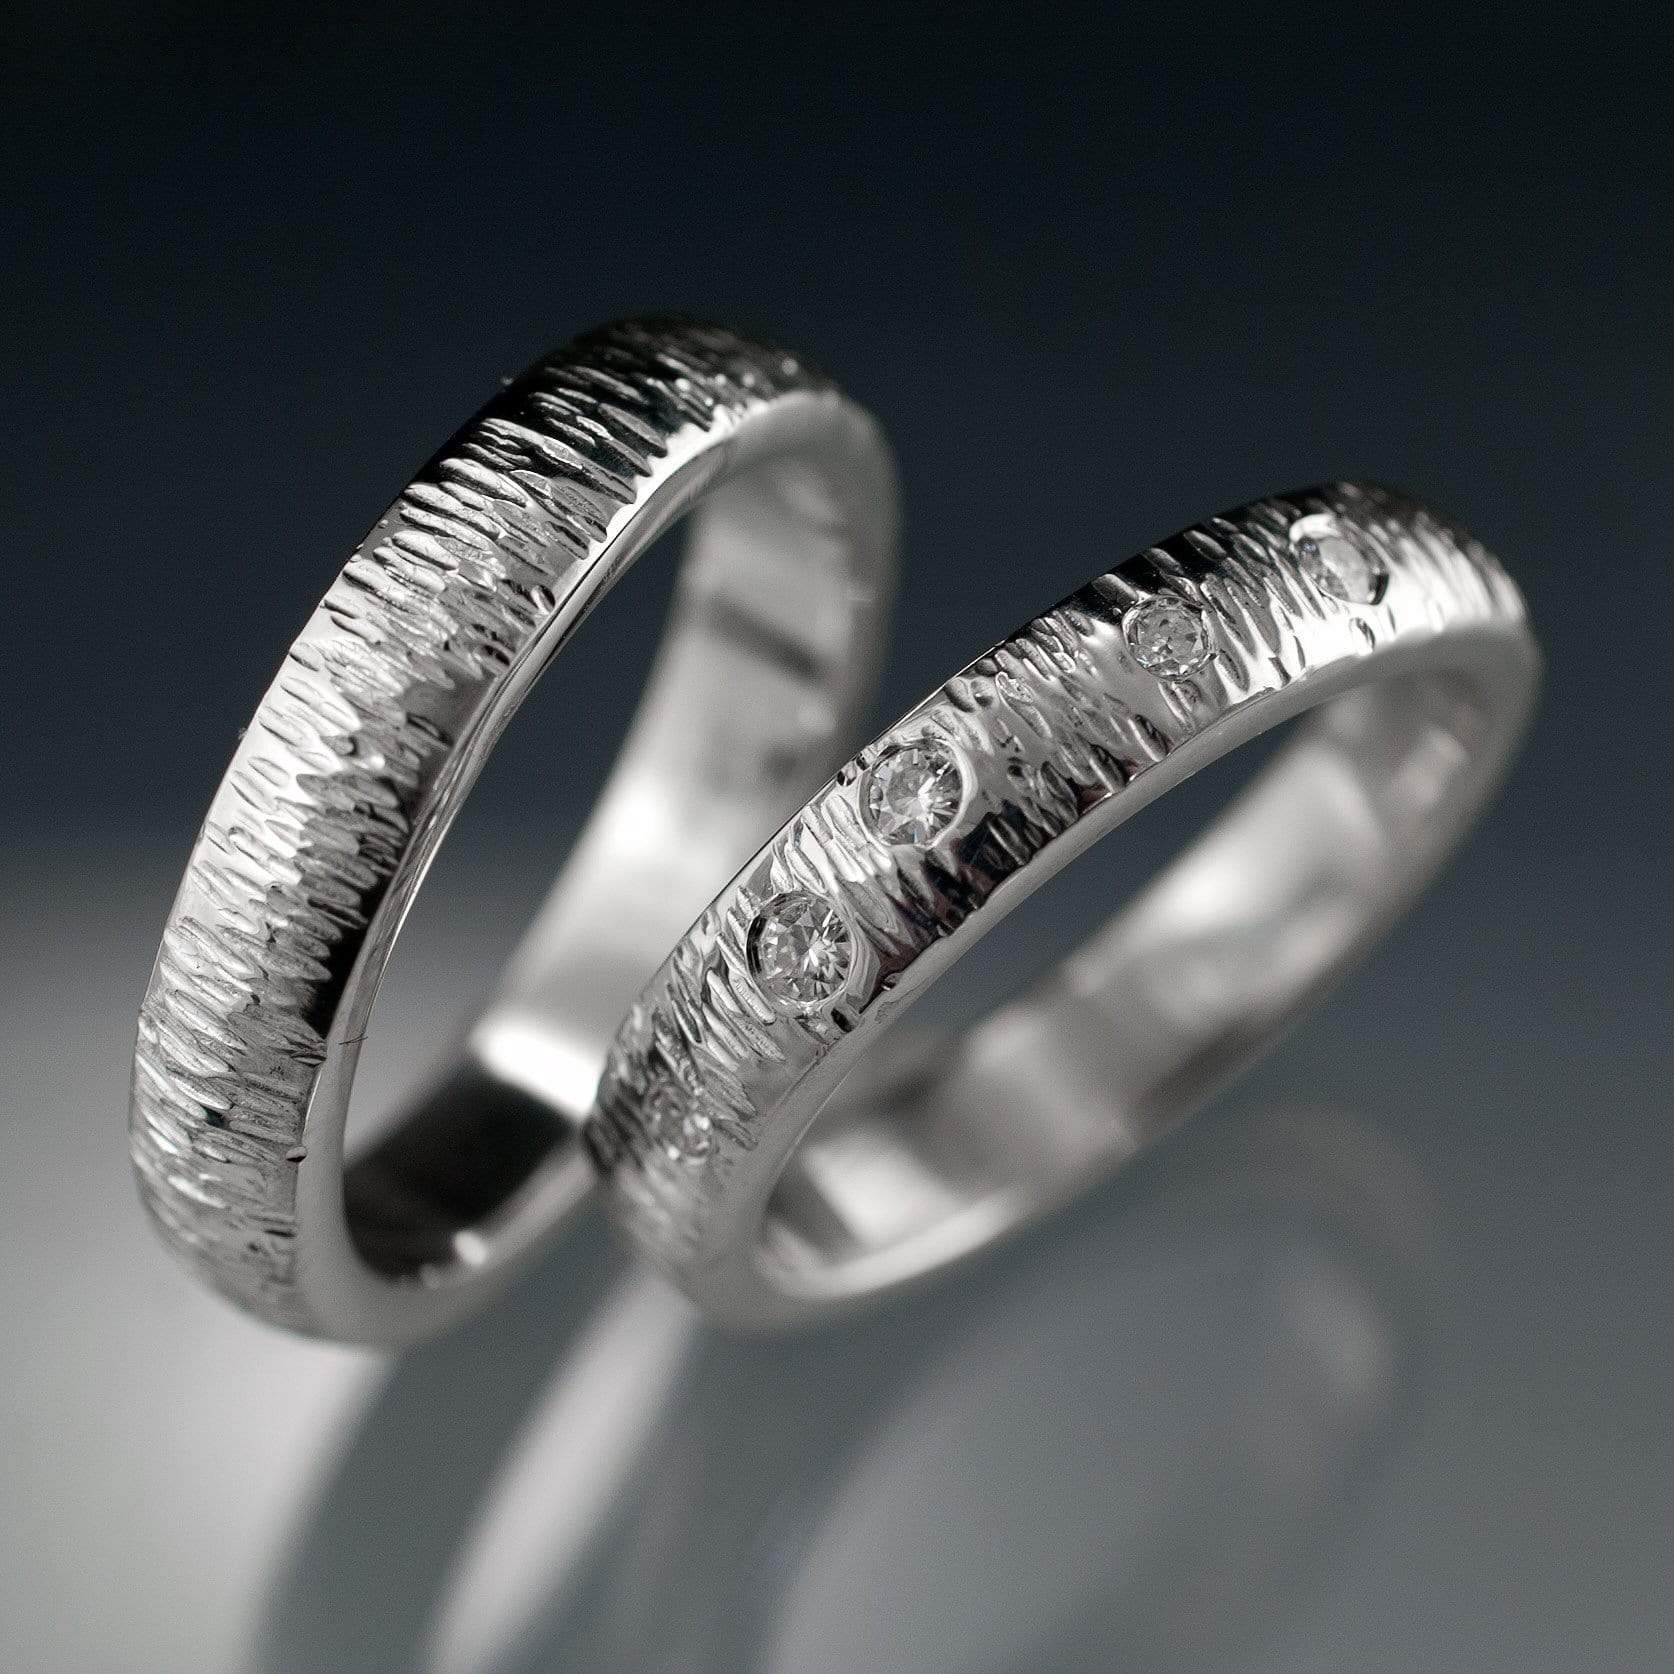 Textured Wedding Bands with Hammered Texture and Flush Set Moissanites Sterling Silver / 3 Ring by Nodeform